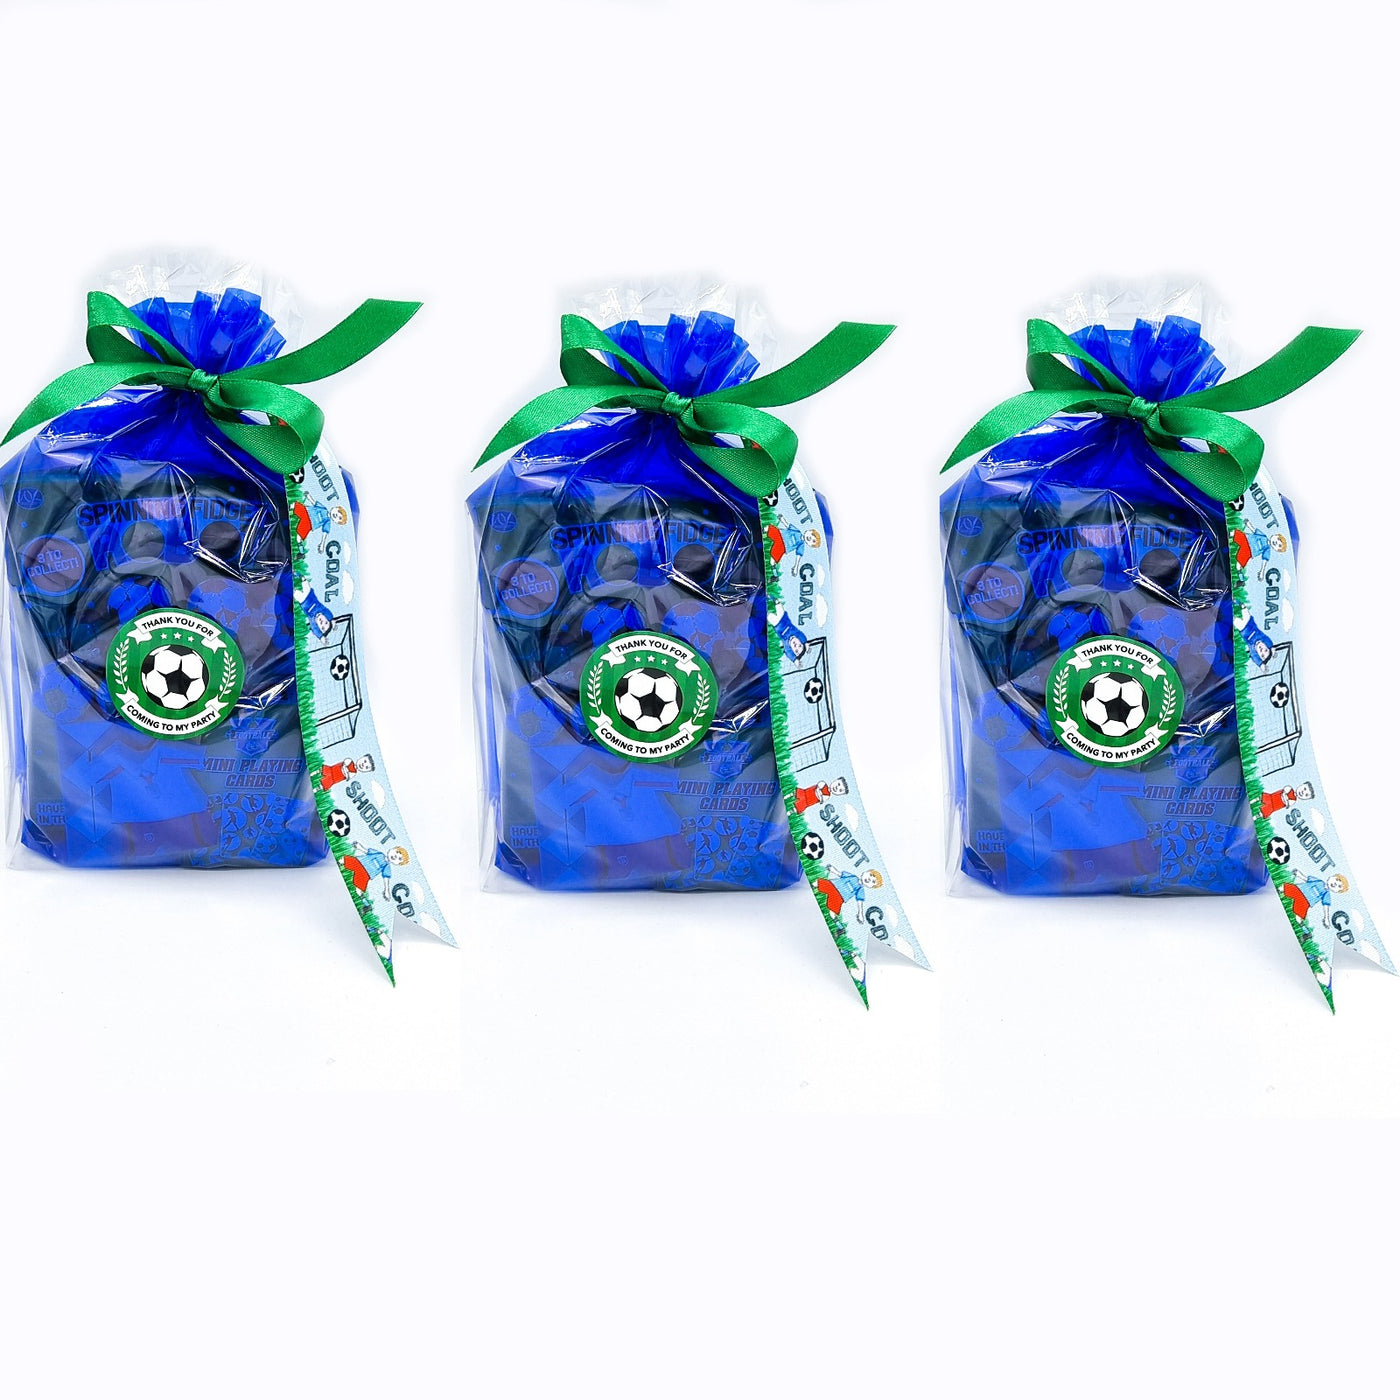 Pre filled football party goody bags with football themed toys and sweets, packed in blue gift bags with football design ribbon. 